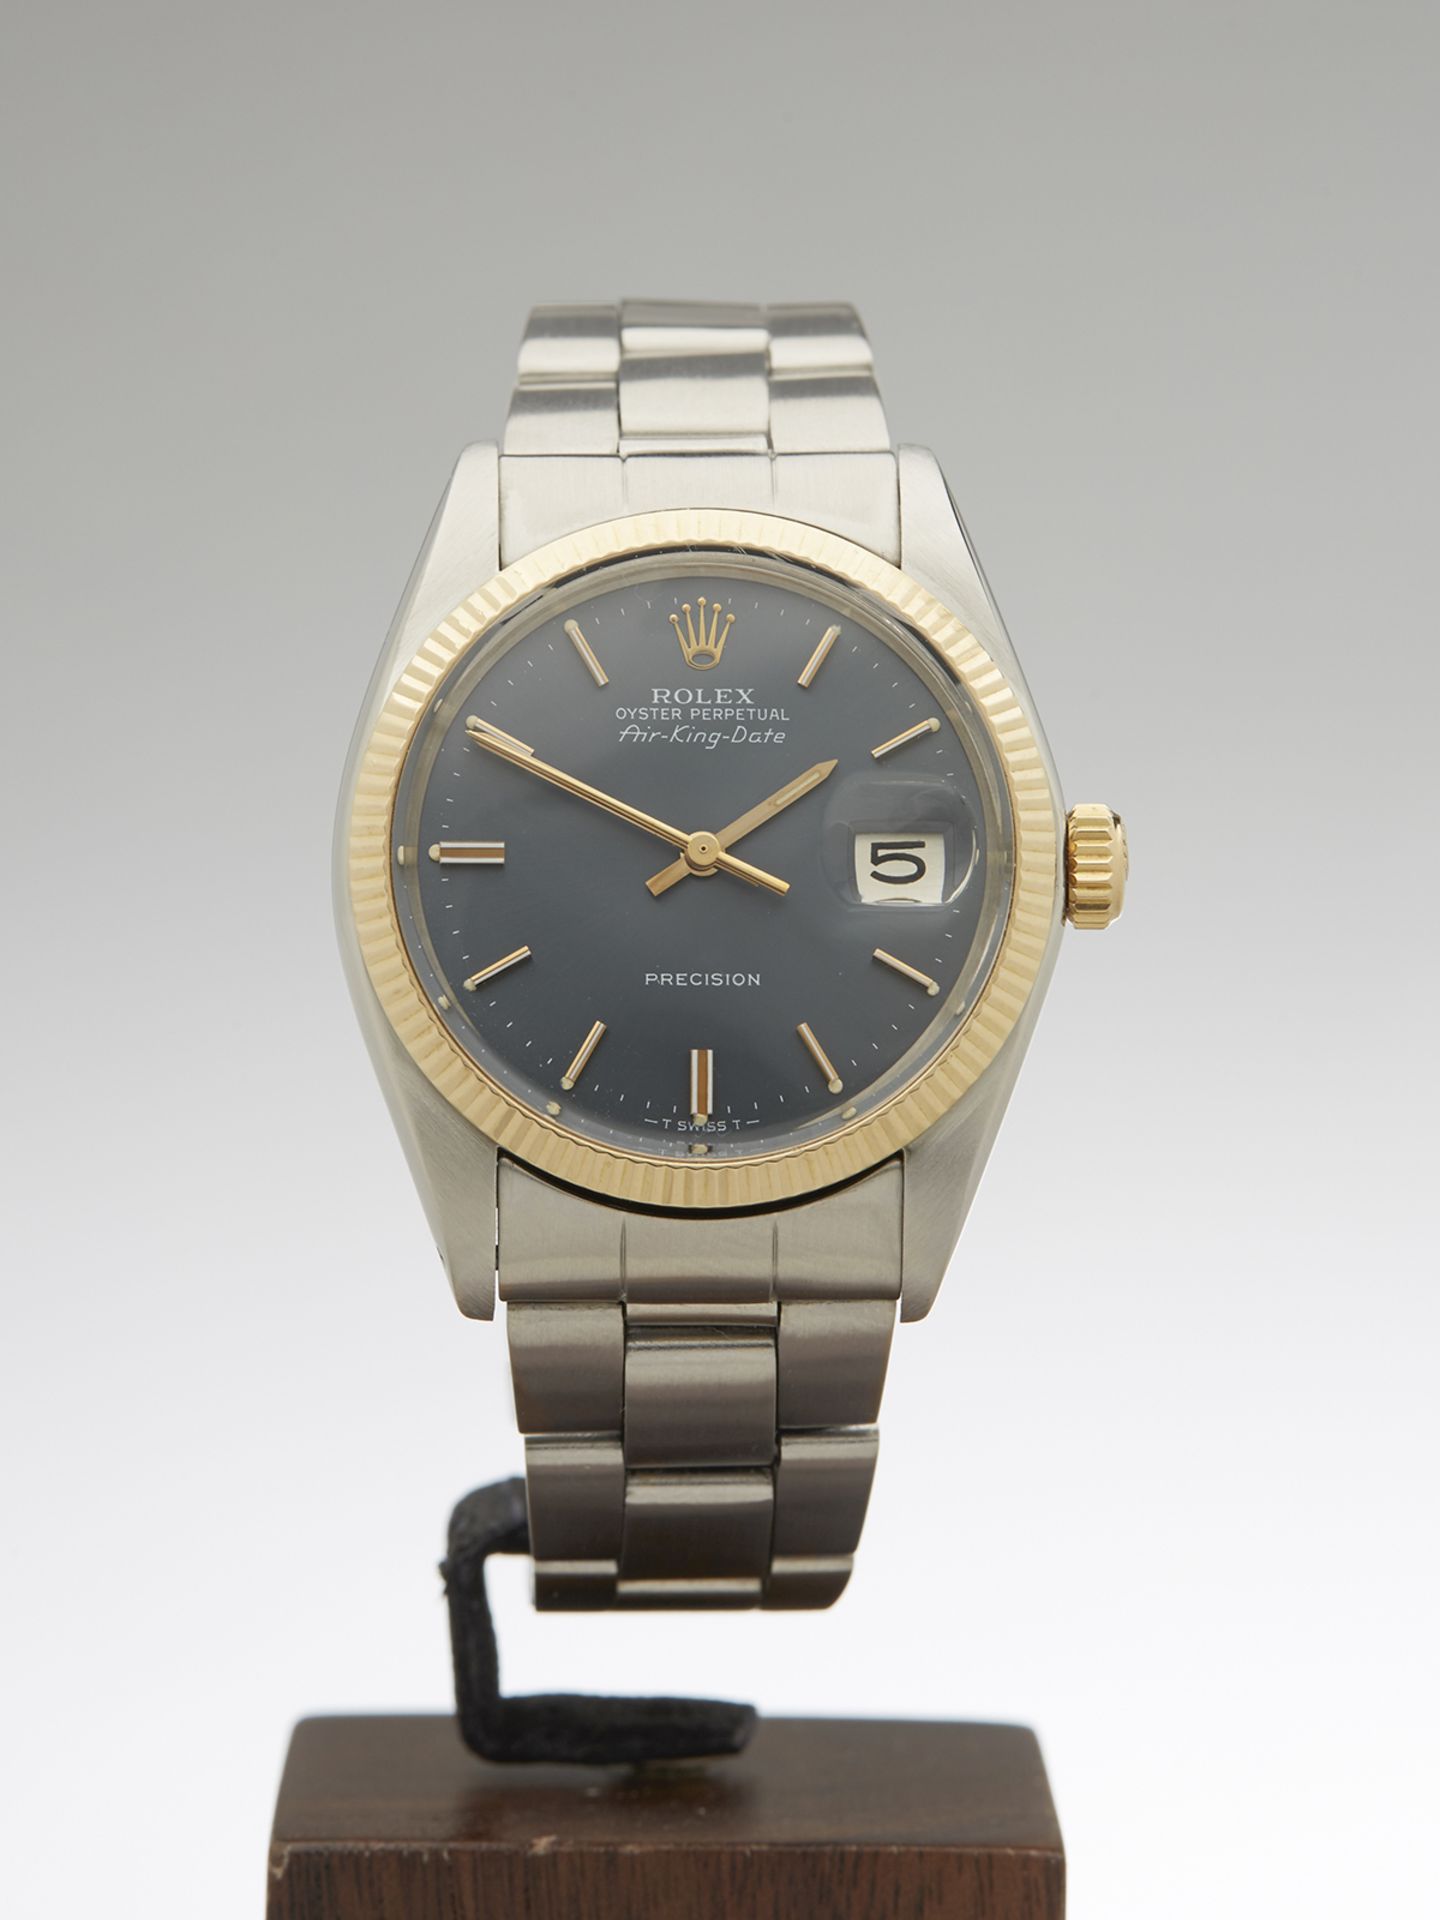 1978 Rolex, Air King Date, Rare Gold Bezel and Crown - Image 3 of 10